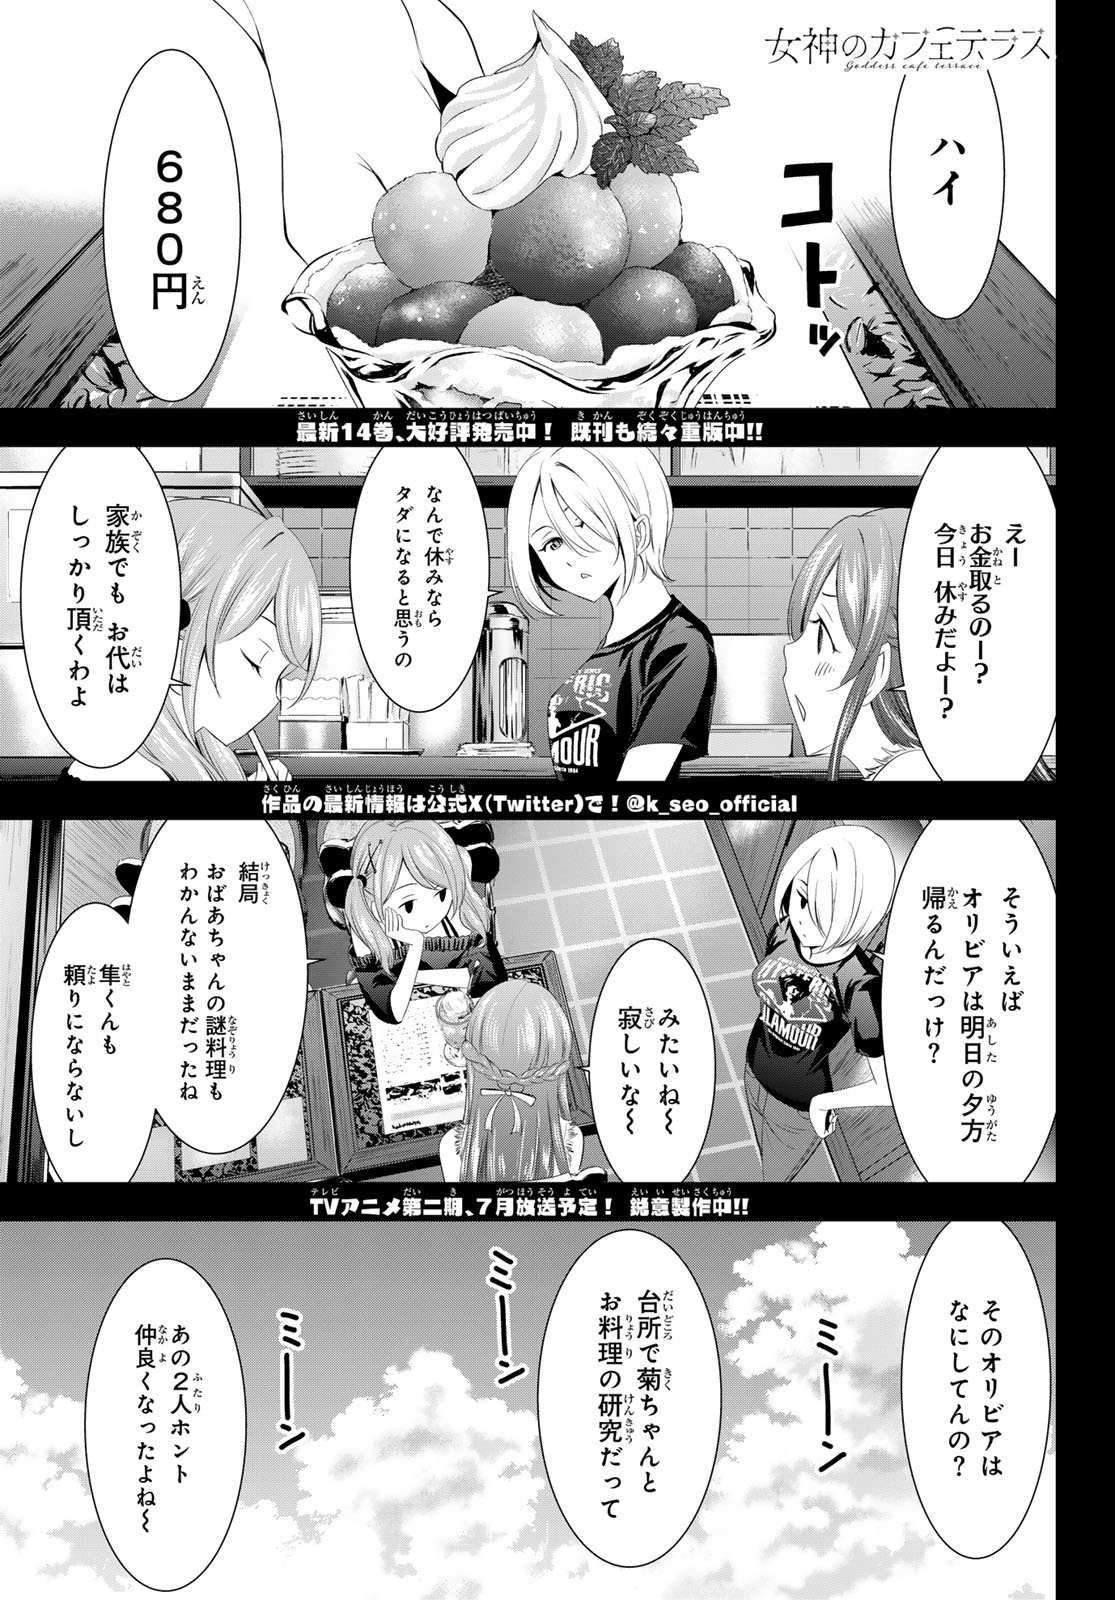 Megami no Cafe Terace - Chapter 143 - Page 1